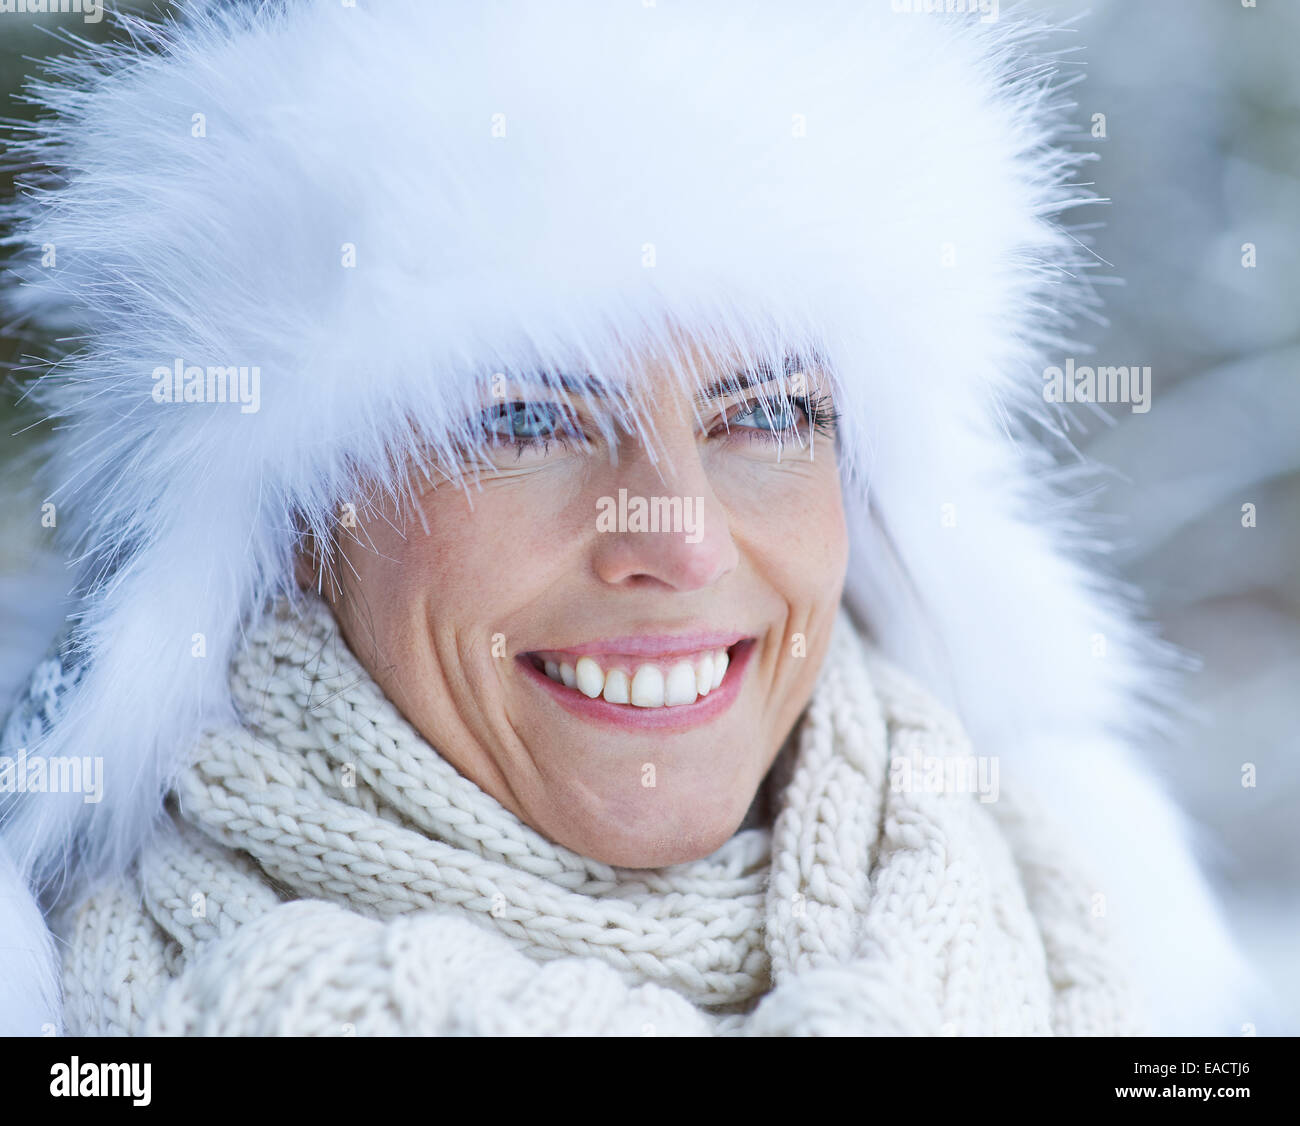 Smiling woman with white fur cap in winter snow Stock Photo